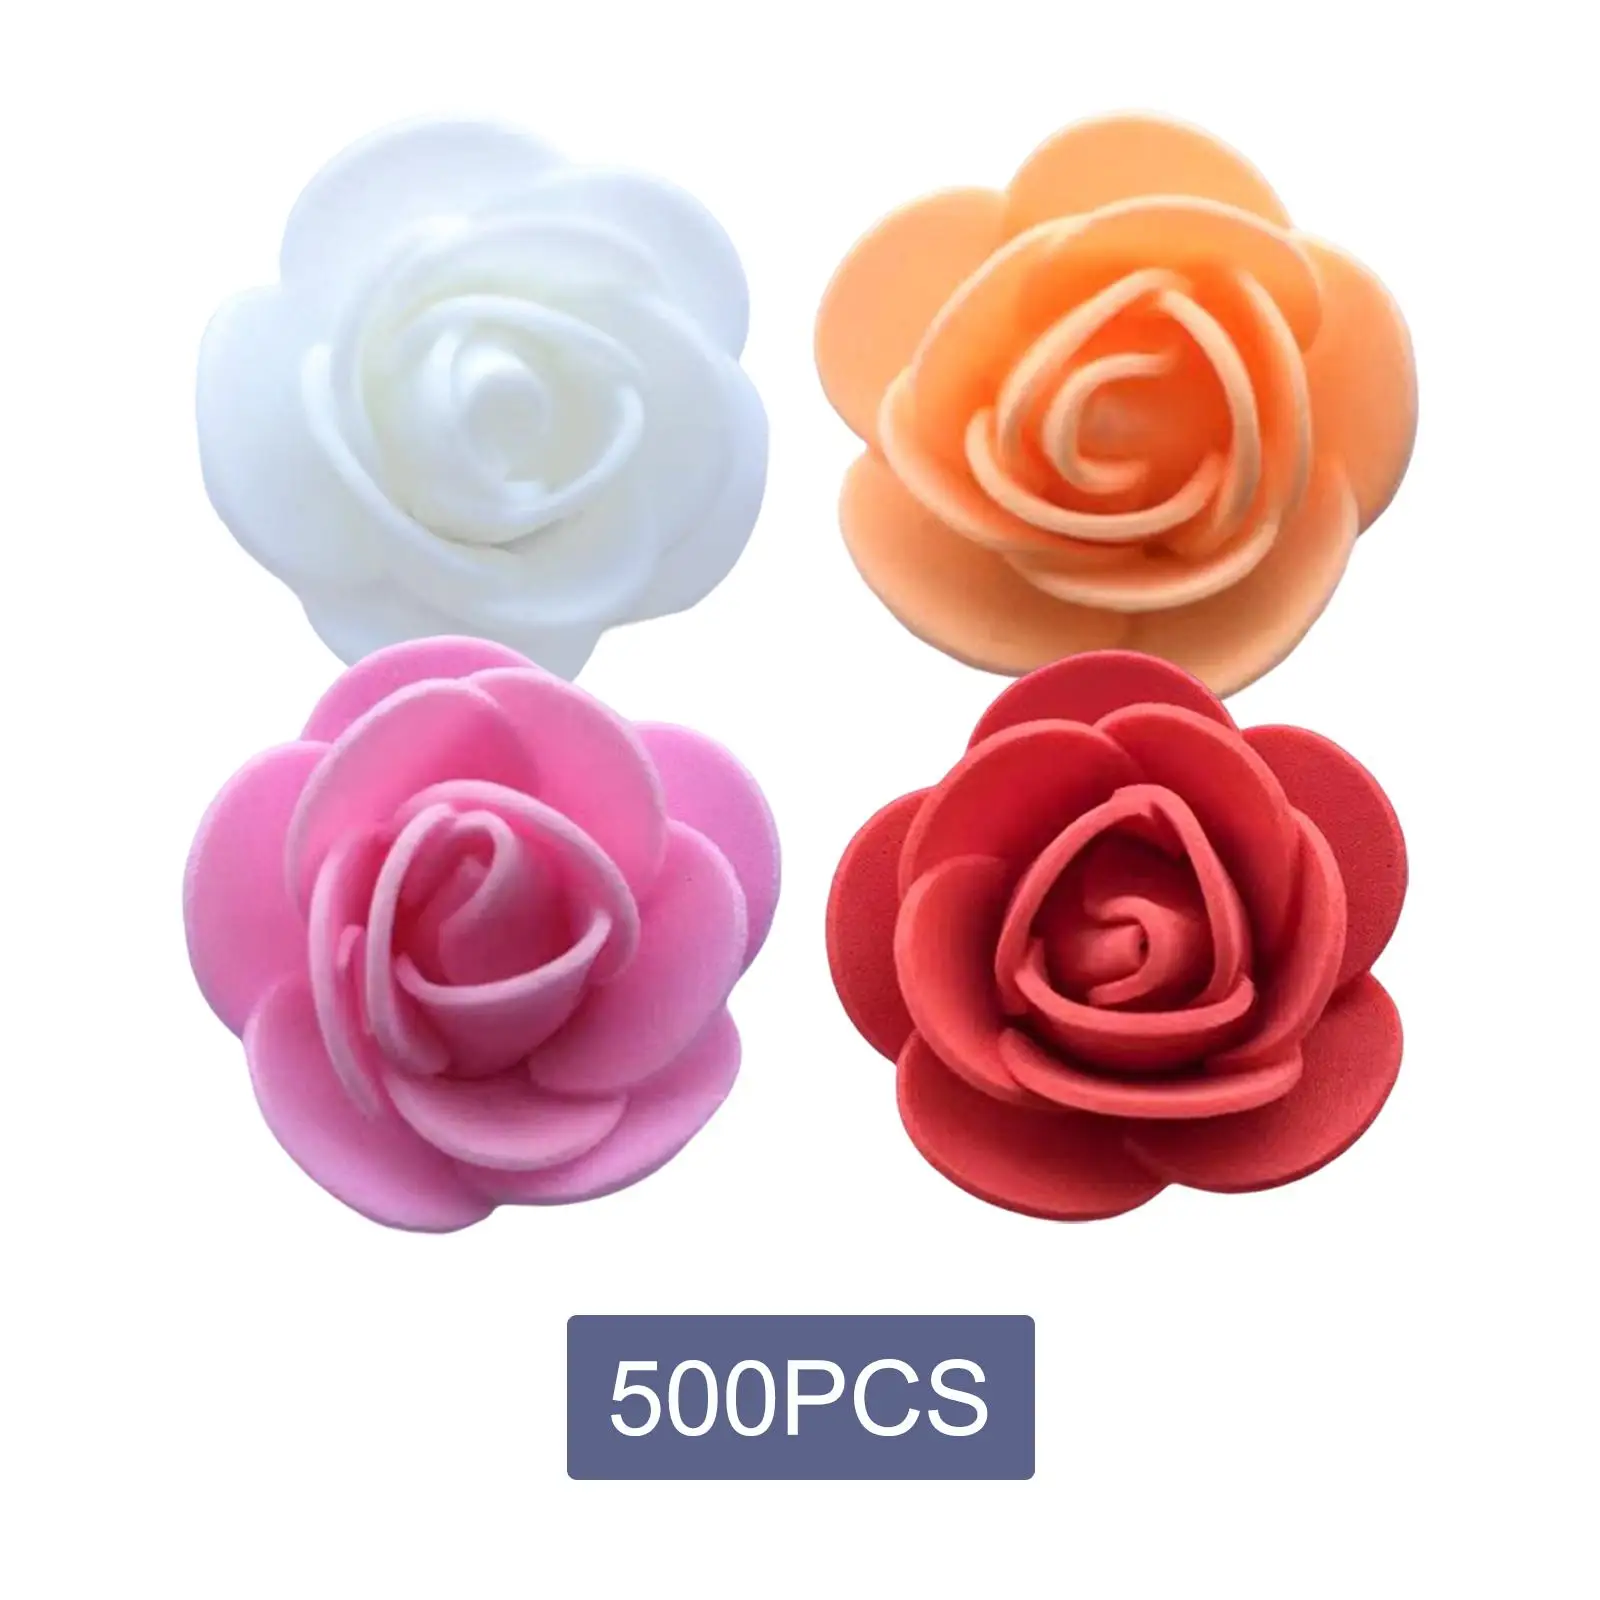 3.5cm Mini Artificial Rose Heads for Party Cake DIY Crafts Decor